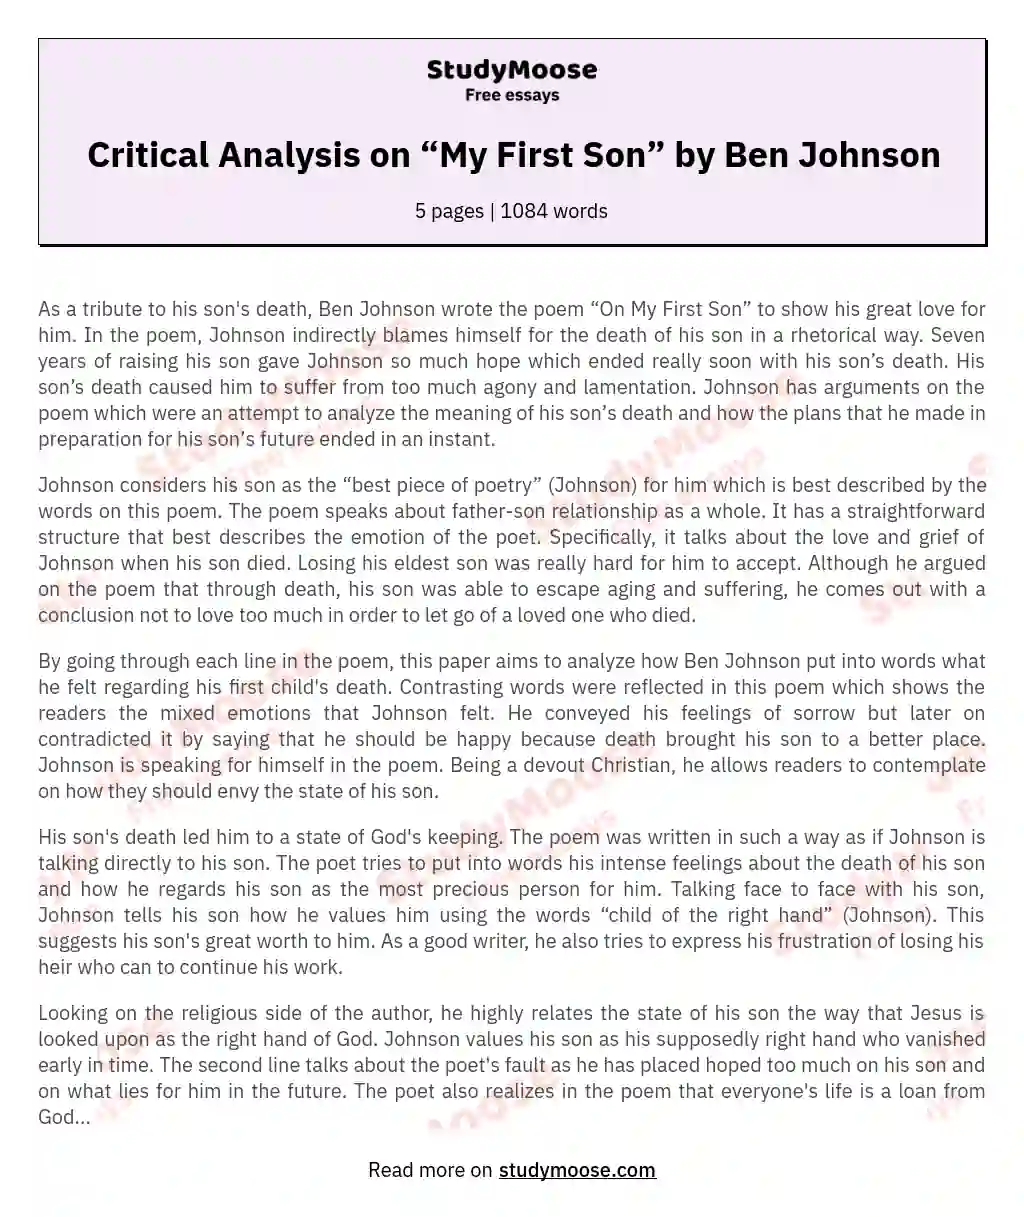 Critical Analysis on “My First Son” by Ben Johnson essay